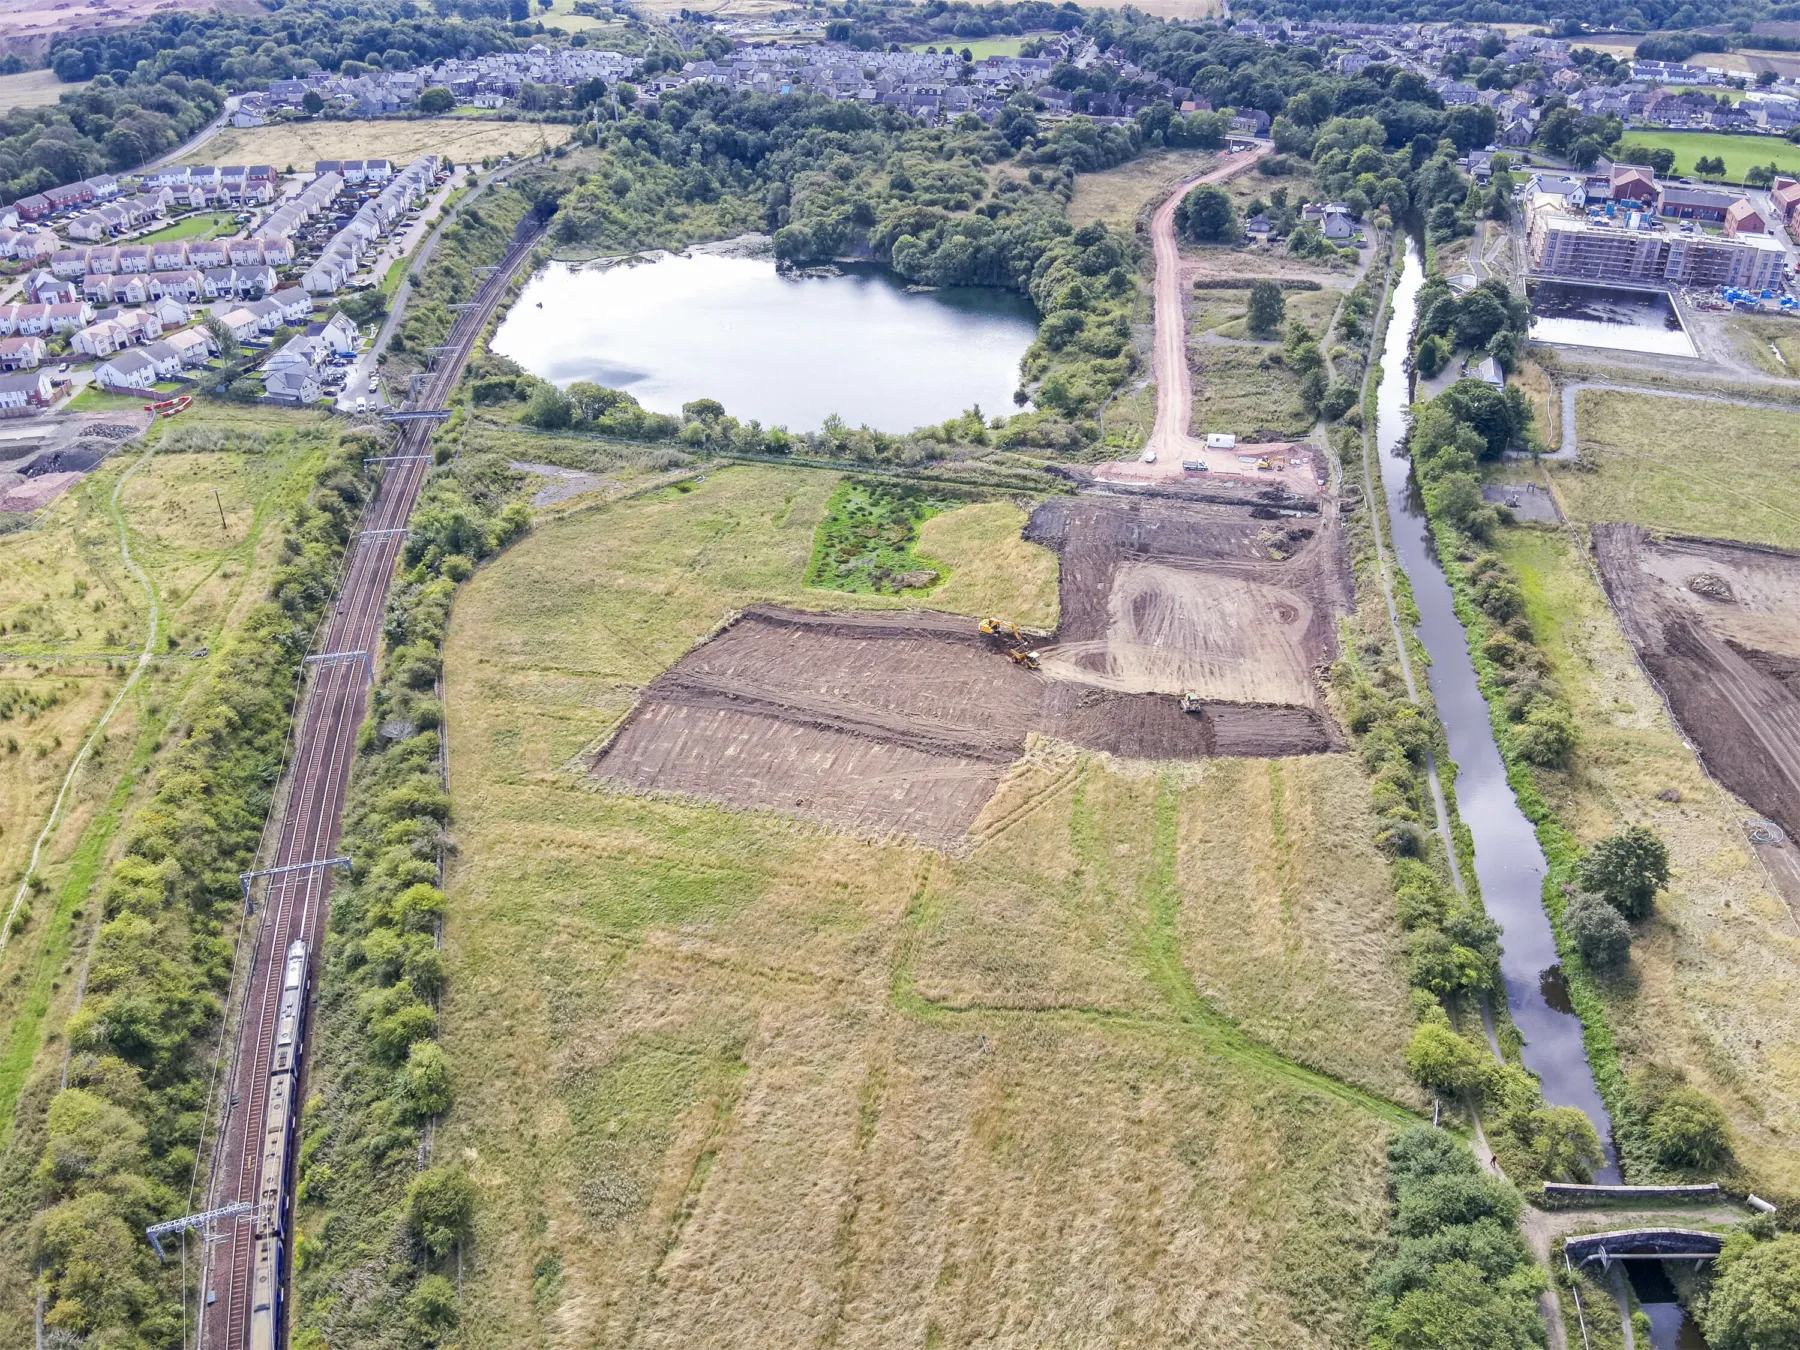 Development underway at Winchburgh with the canal and railway line visible from the air. A flooded quarry is shown alongwith works for new roads and a new marina basin adjoining the canal is just in shot.